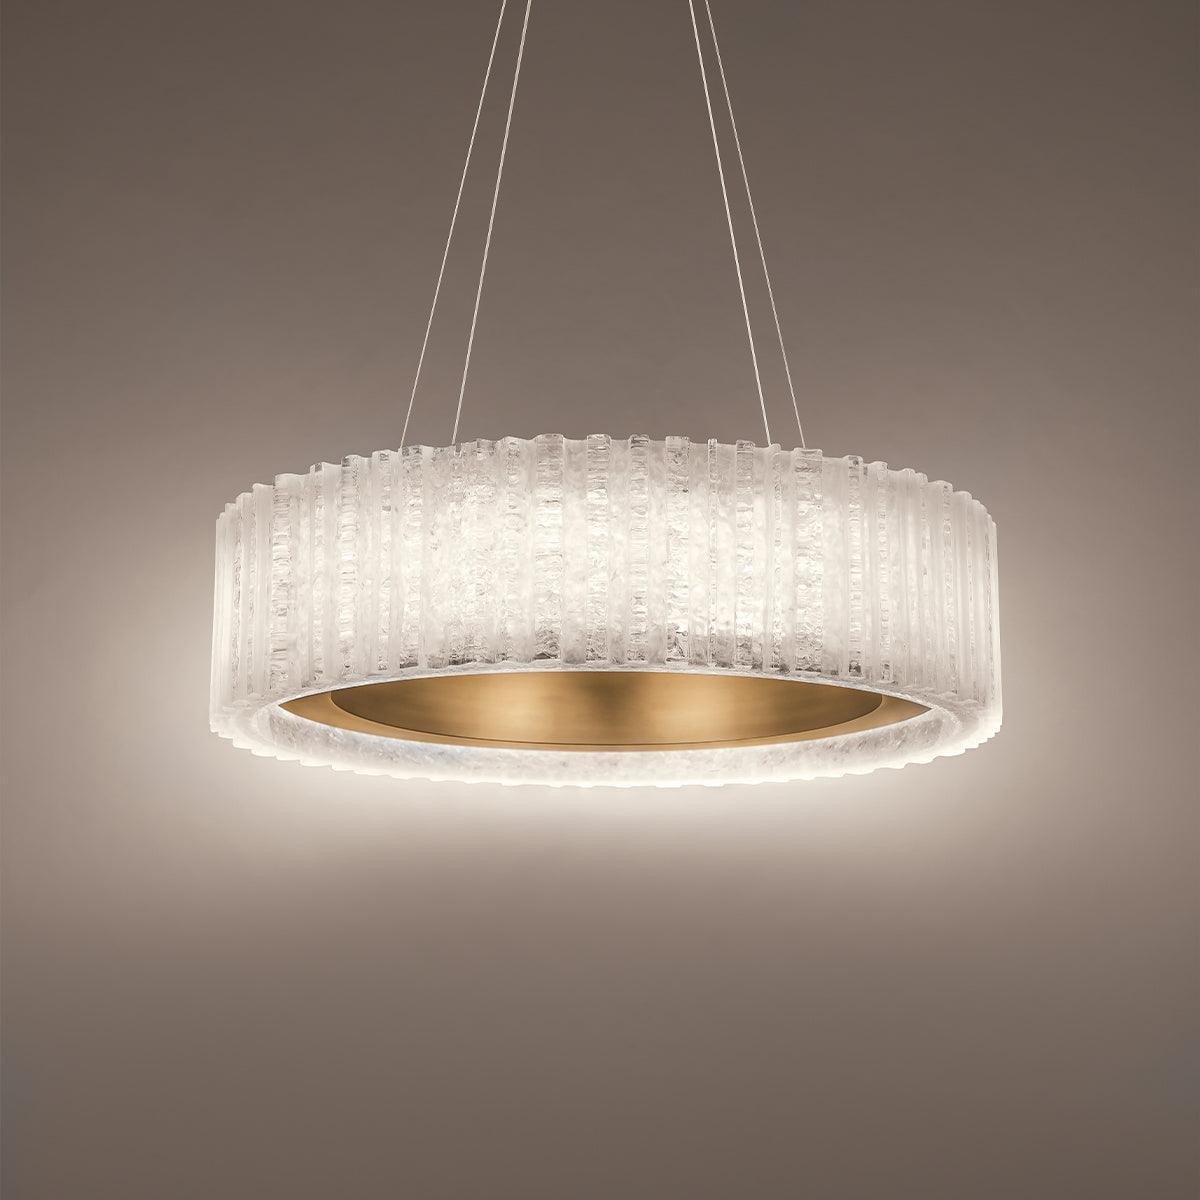 Montreal Lighting & Hardware - Rhiannon LED Chandelier by Modern Forms | Open Box - PD-70128-AB-OB | Montreal Lighting & Hardware